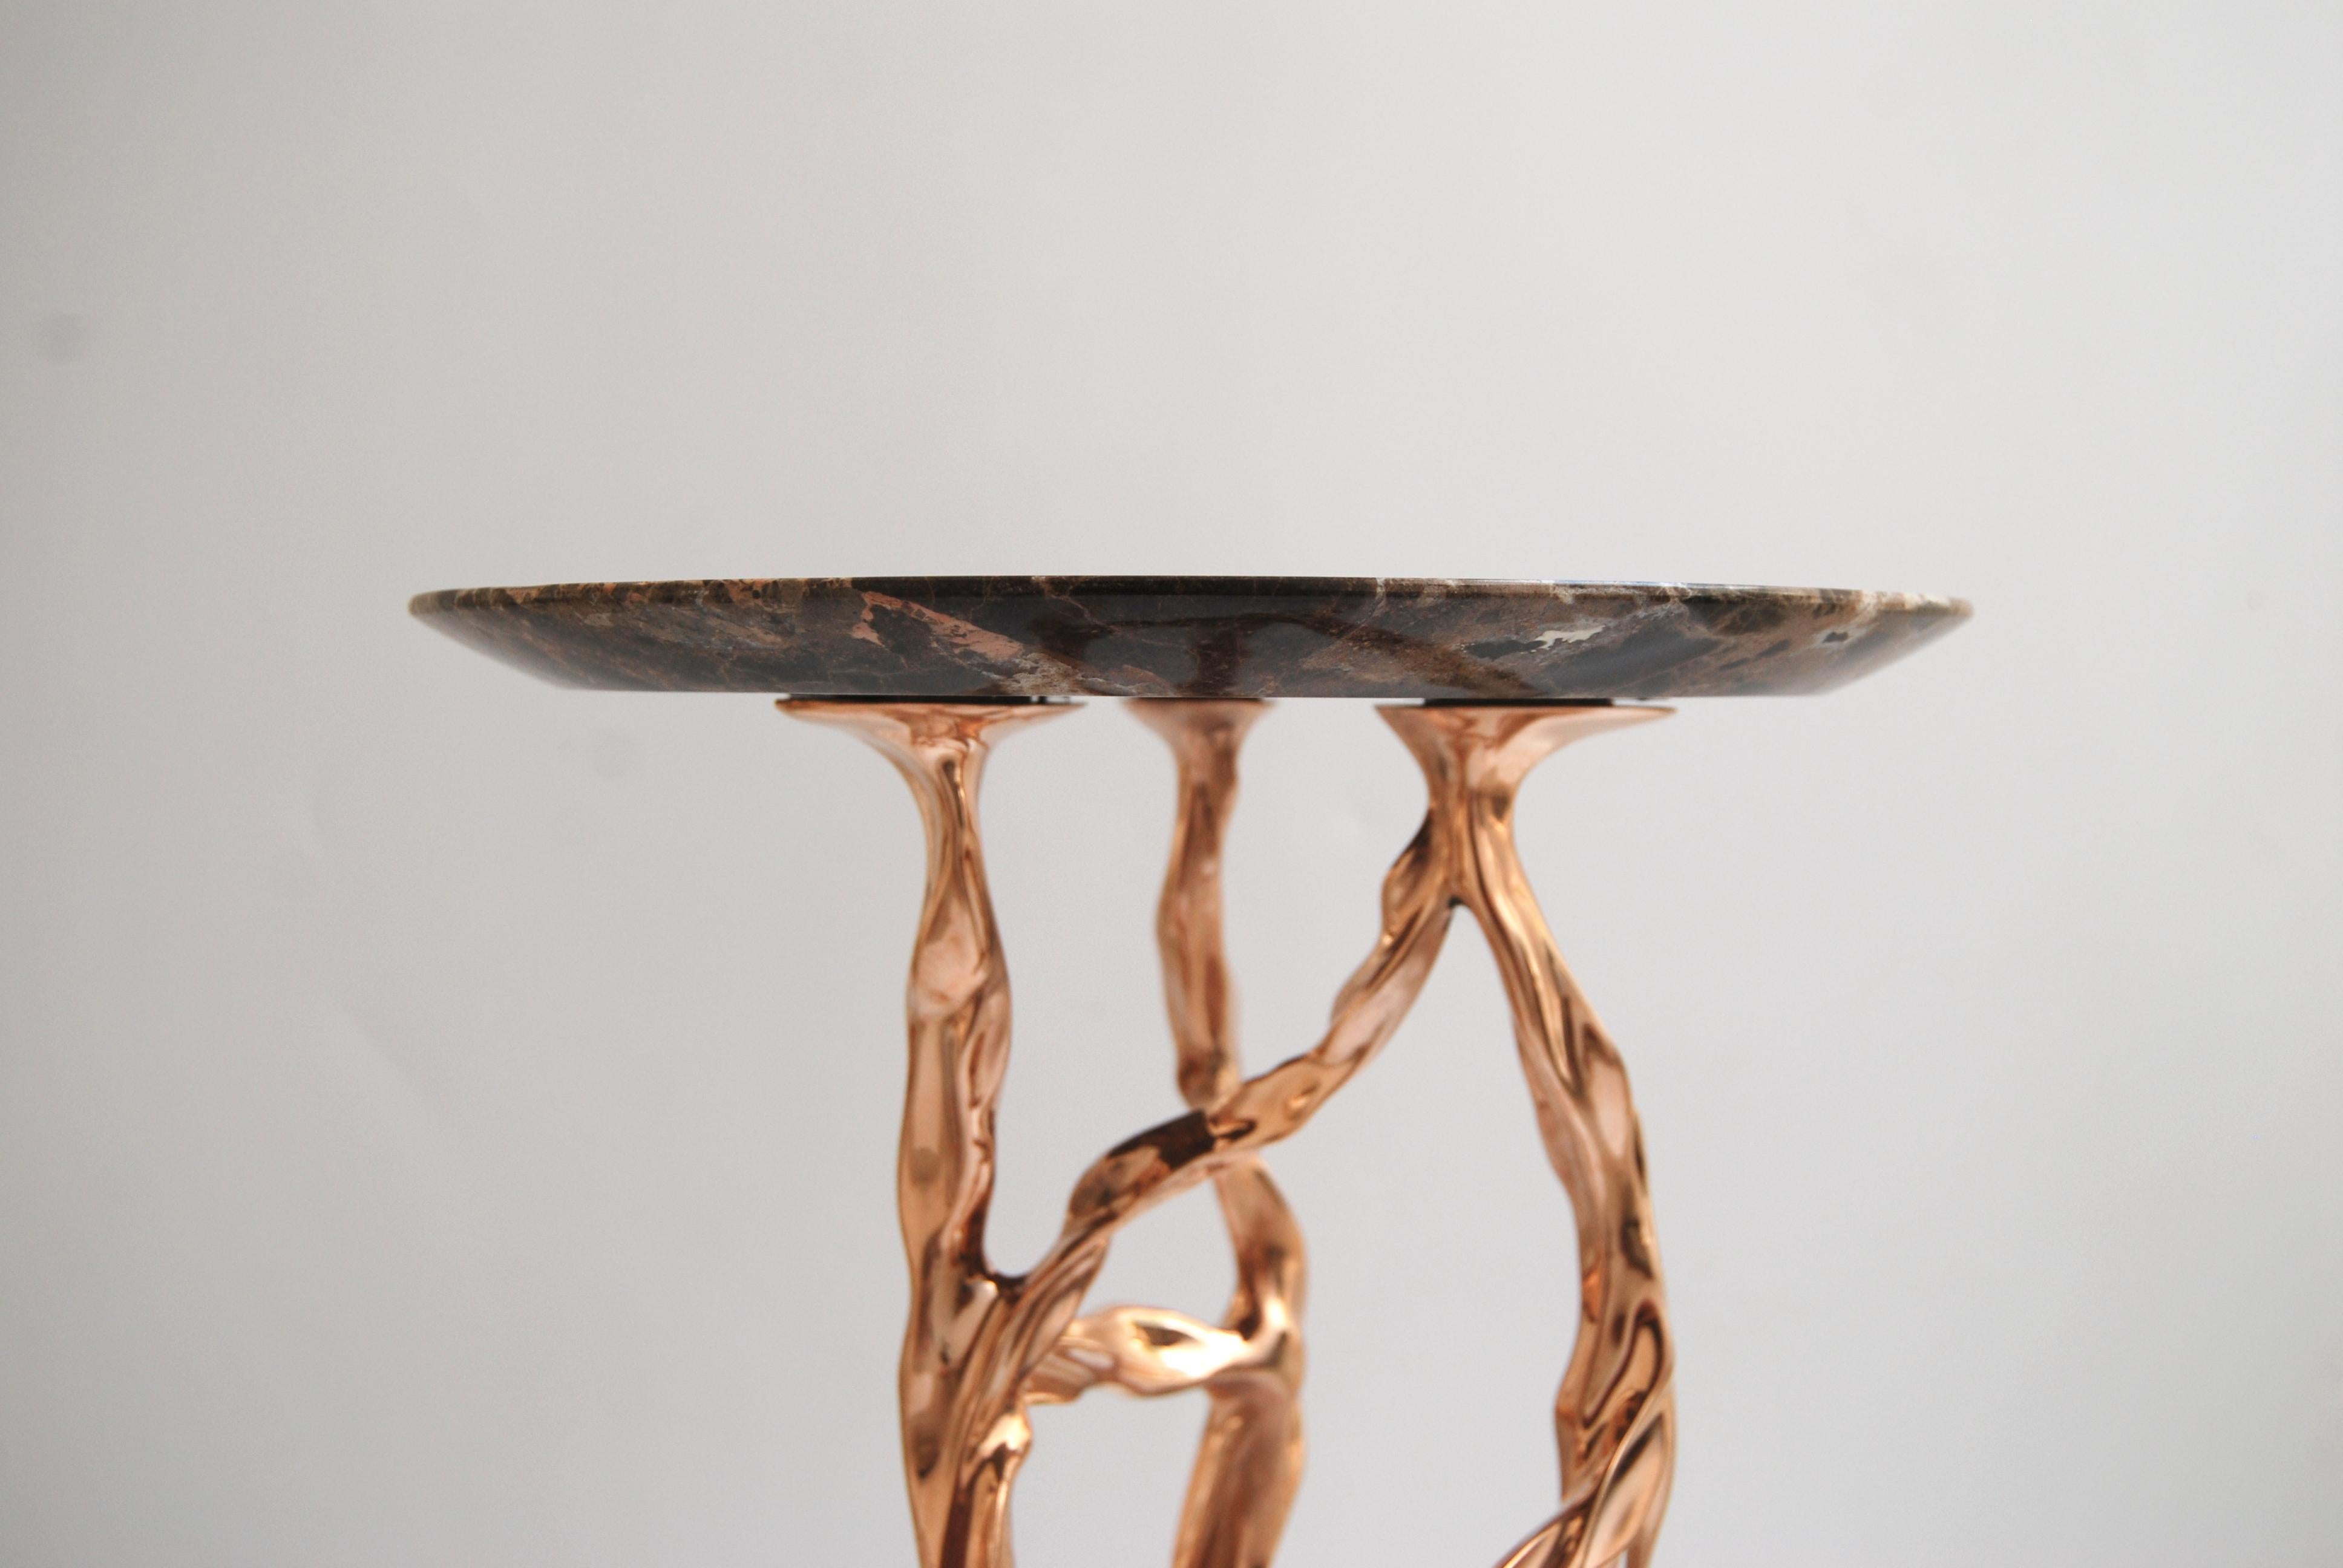 Polished bronze side table with marquina marble top by FAKASAKA Design
Dimensions: W 28 x D 28 x H 62 cm
Materials: Polished bronze, Nero marquina marble top.

  